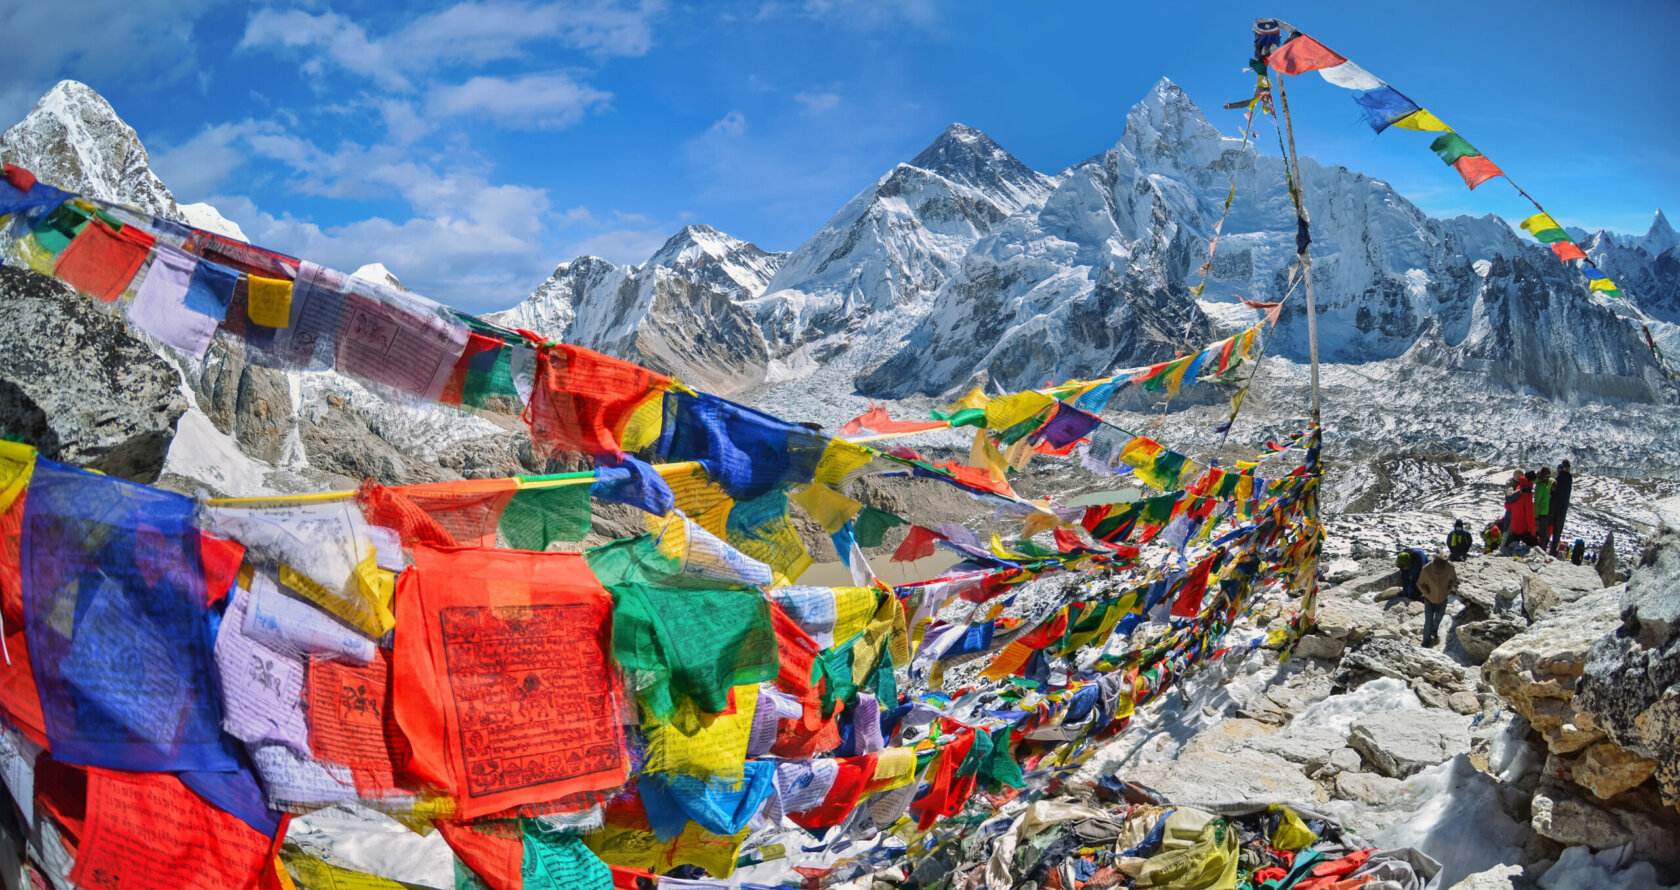 View of Mount Everest and Nuptse  with buddhist prayer flags from kala patthar in Sagarmatha National Park in the Nepal Himalaya